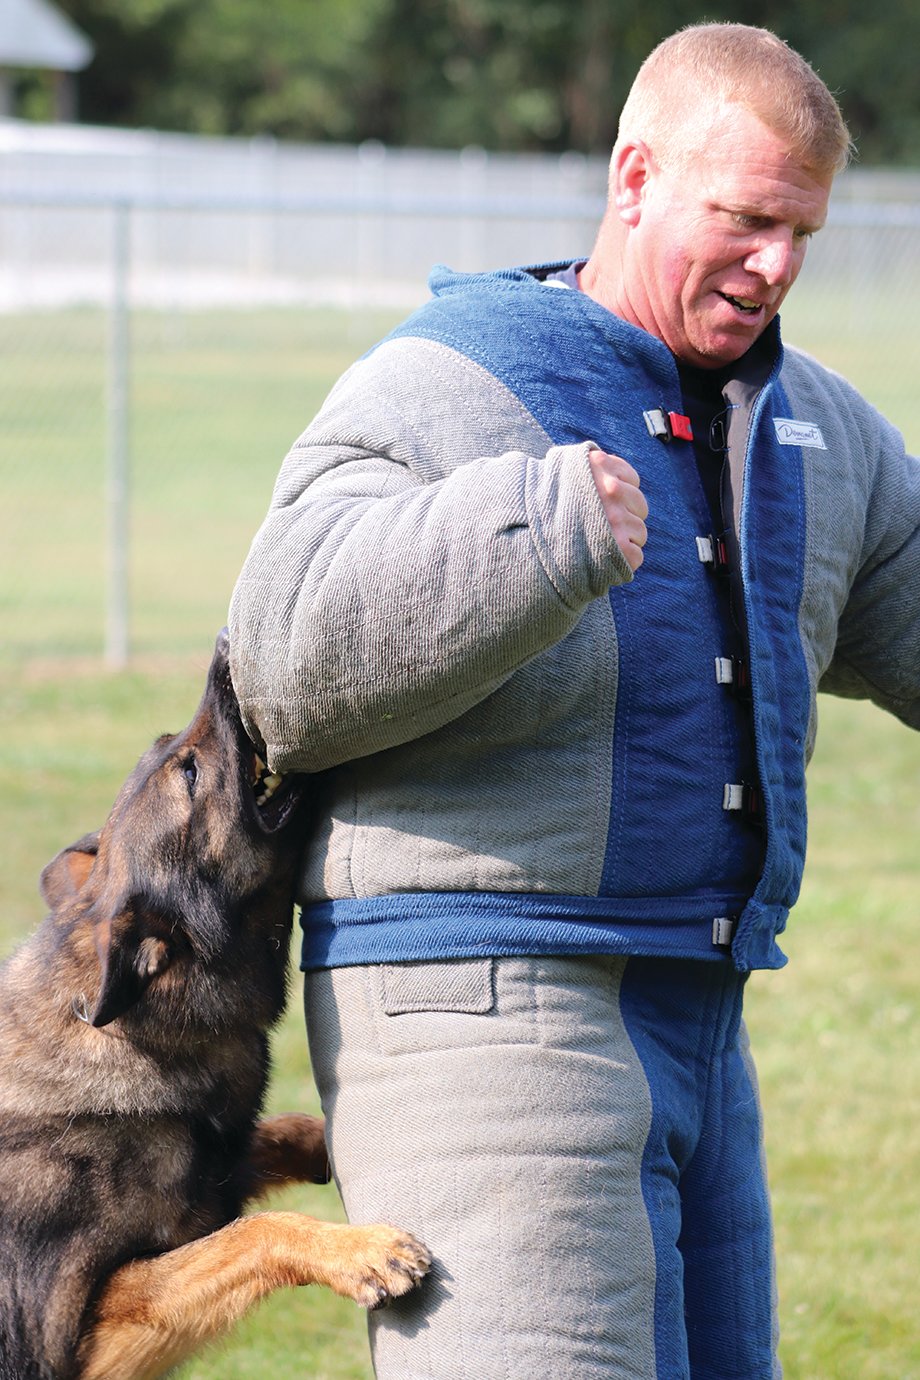 CPD Officer Russ Keller endures a strategic chomp by Crawfordsville K9 Officer Draco on Tuesday as part of a North American Police Work Dog Association training session behind the Animal Welfare League shelter.